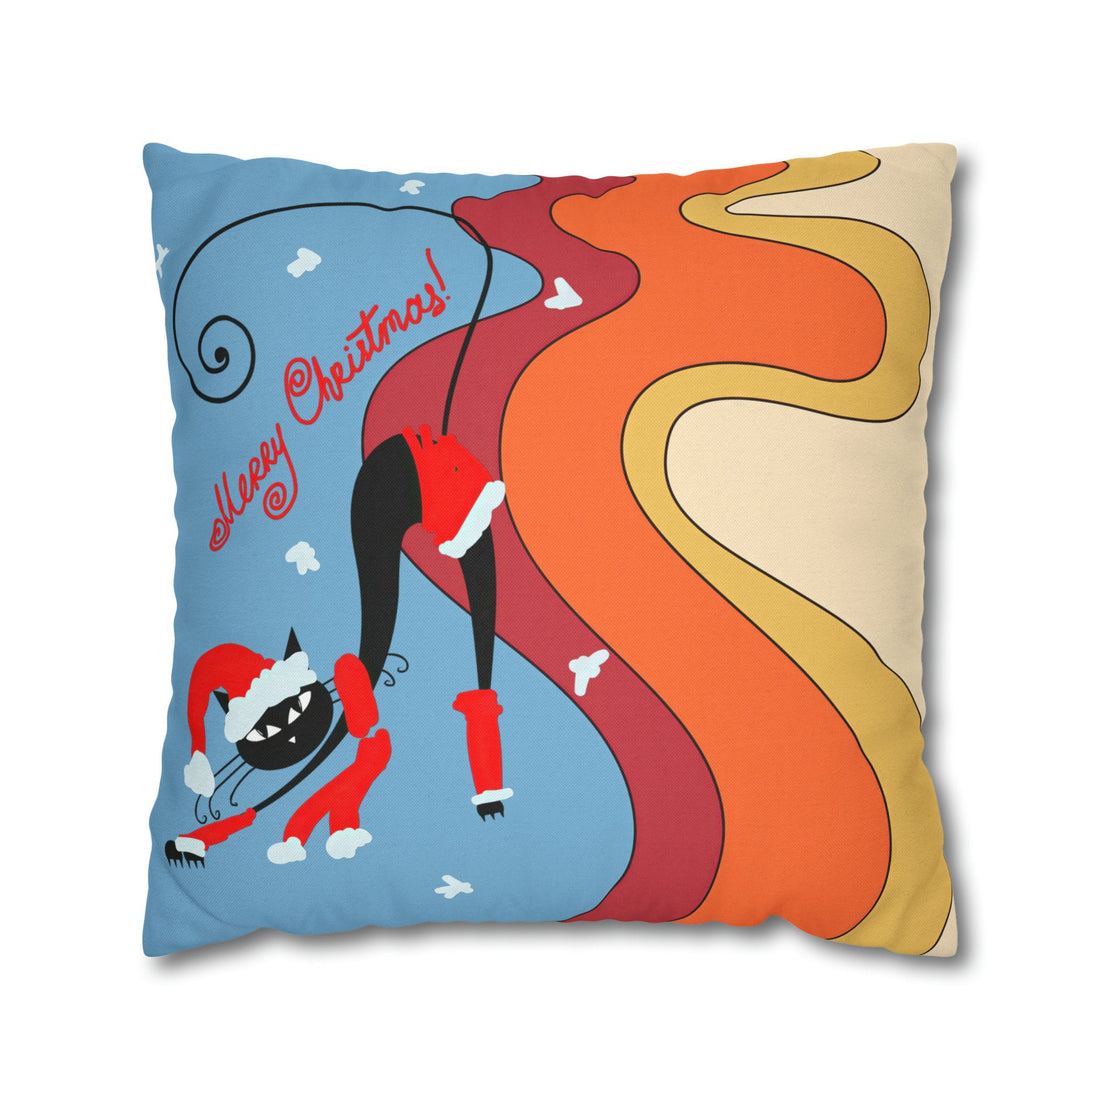 Kate McEnroe New York Groovy Retro Atomic Kitschy Cat Merry Christmas Pillow Cover, Mid Century Modern Cushion Covers, MCM Holiday Pillow CaseThrow Pillow Covers22459229526049089075